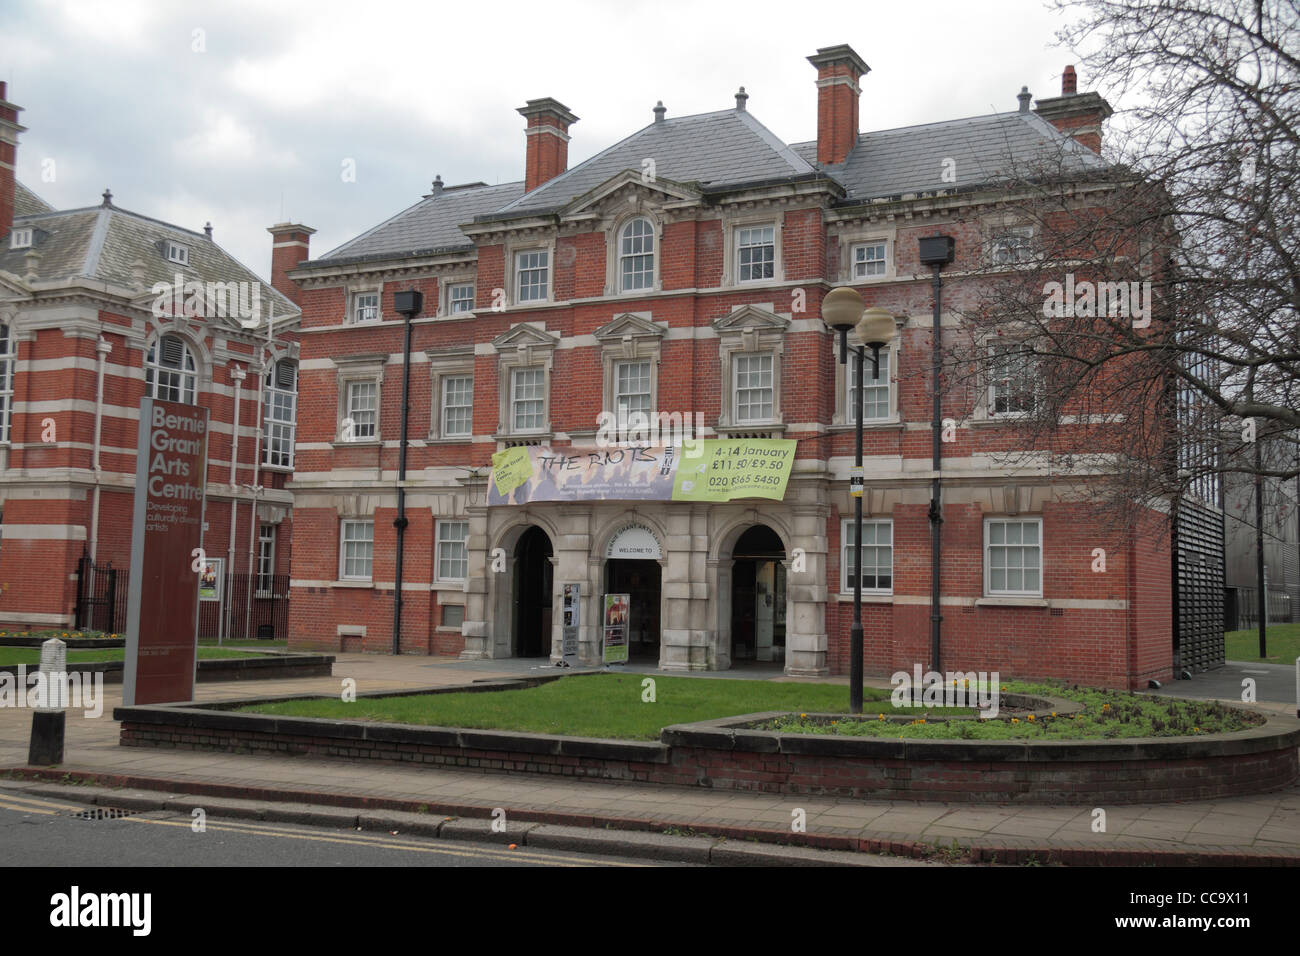 The front entrance building (called The Hub') of the Bernie Grant Arts Centre, Tottenham, North London, United Kingdom, Stock Photo